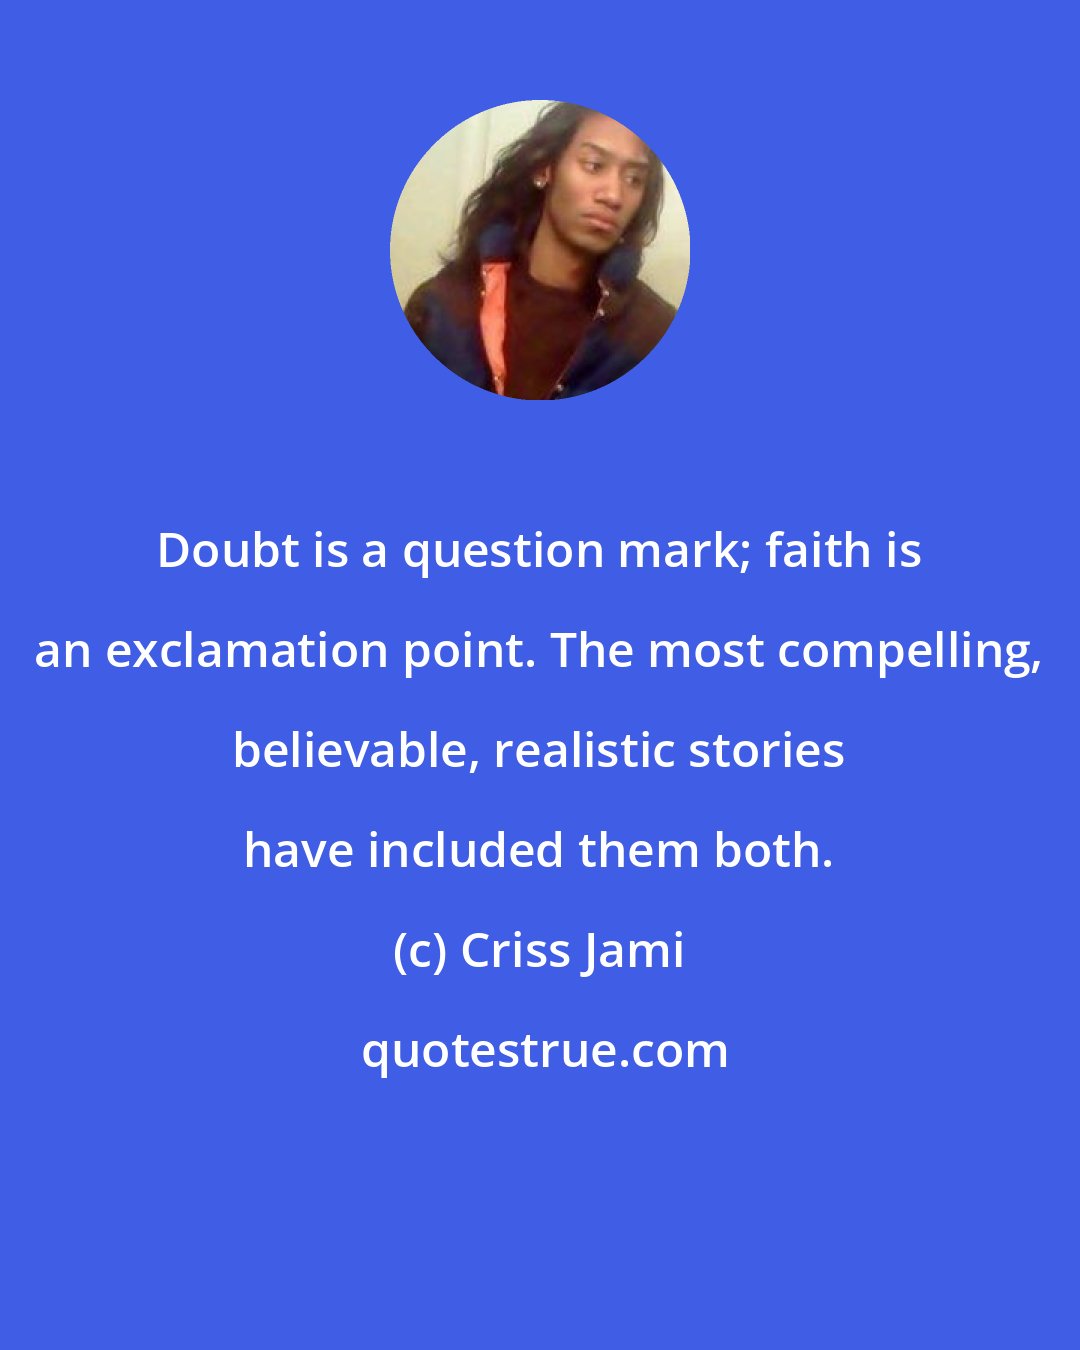 Criss Jami: Doubt is a question mark; faith is an exclamation point. The most compelling, believable, realistic stories have included them both.